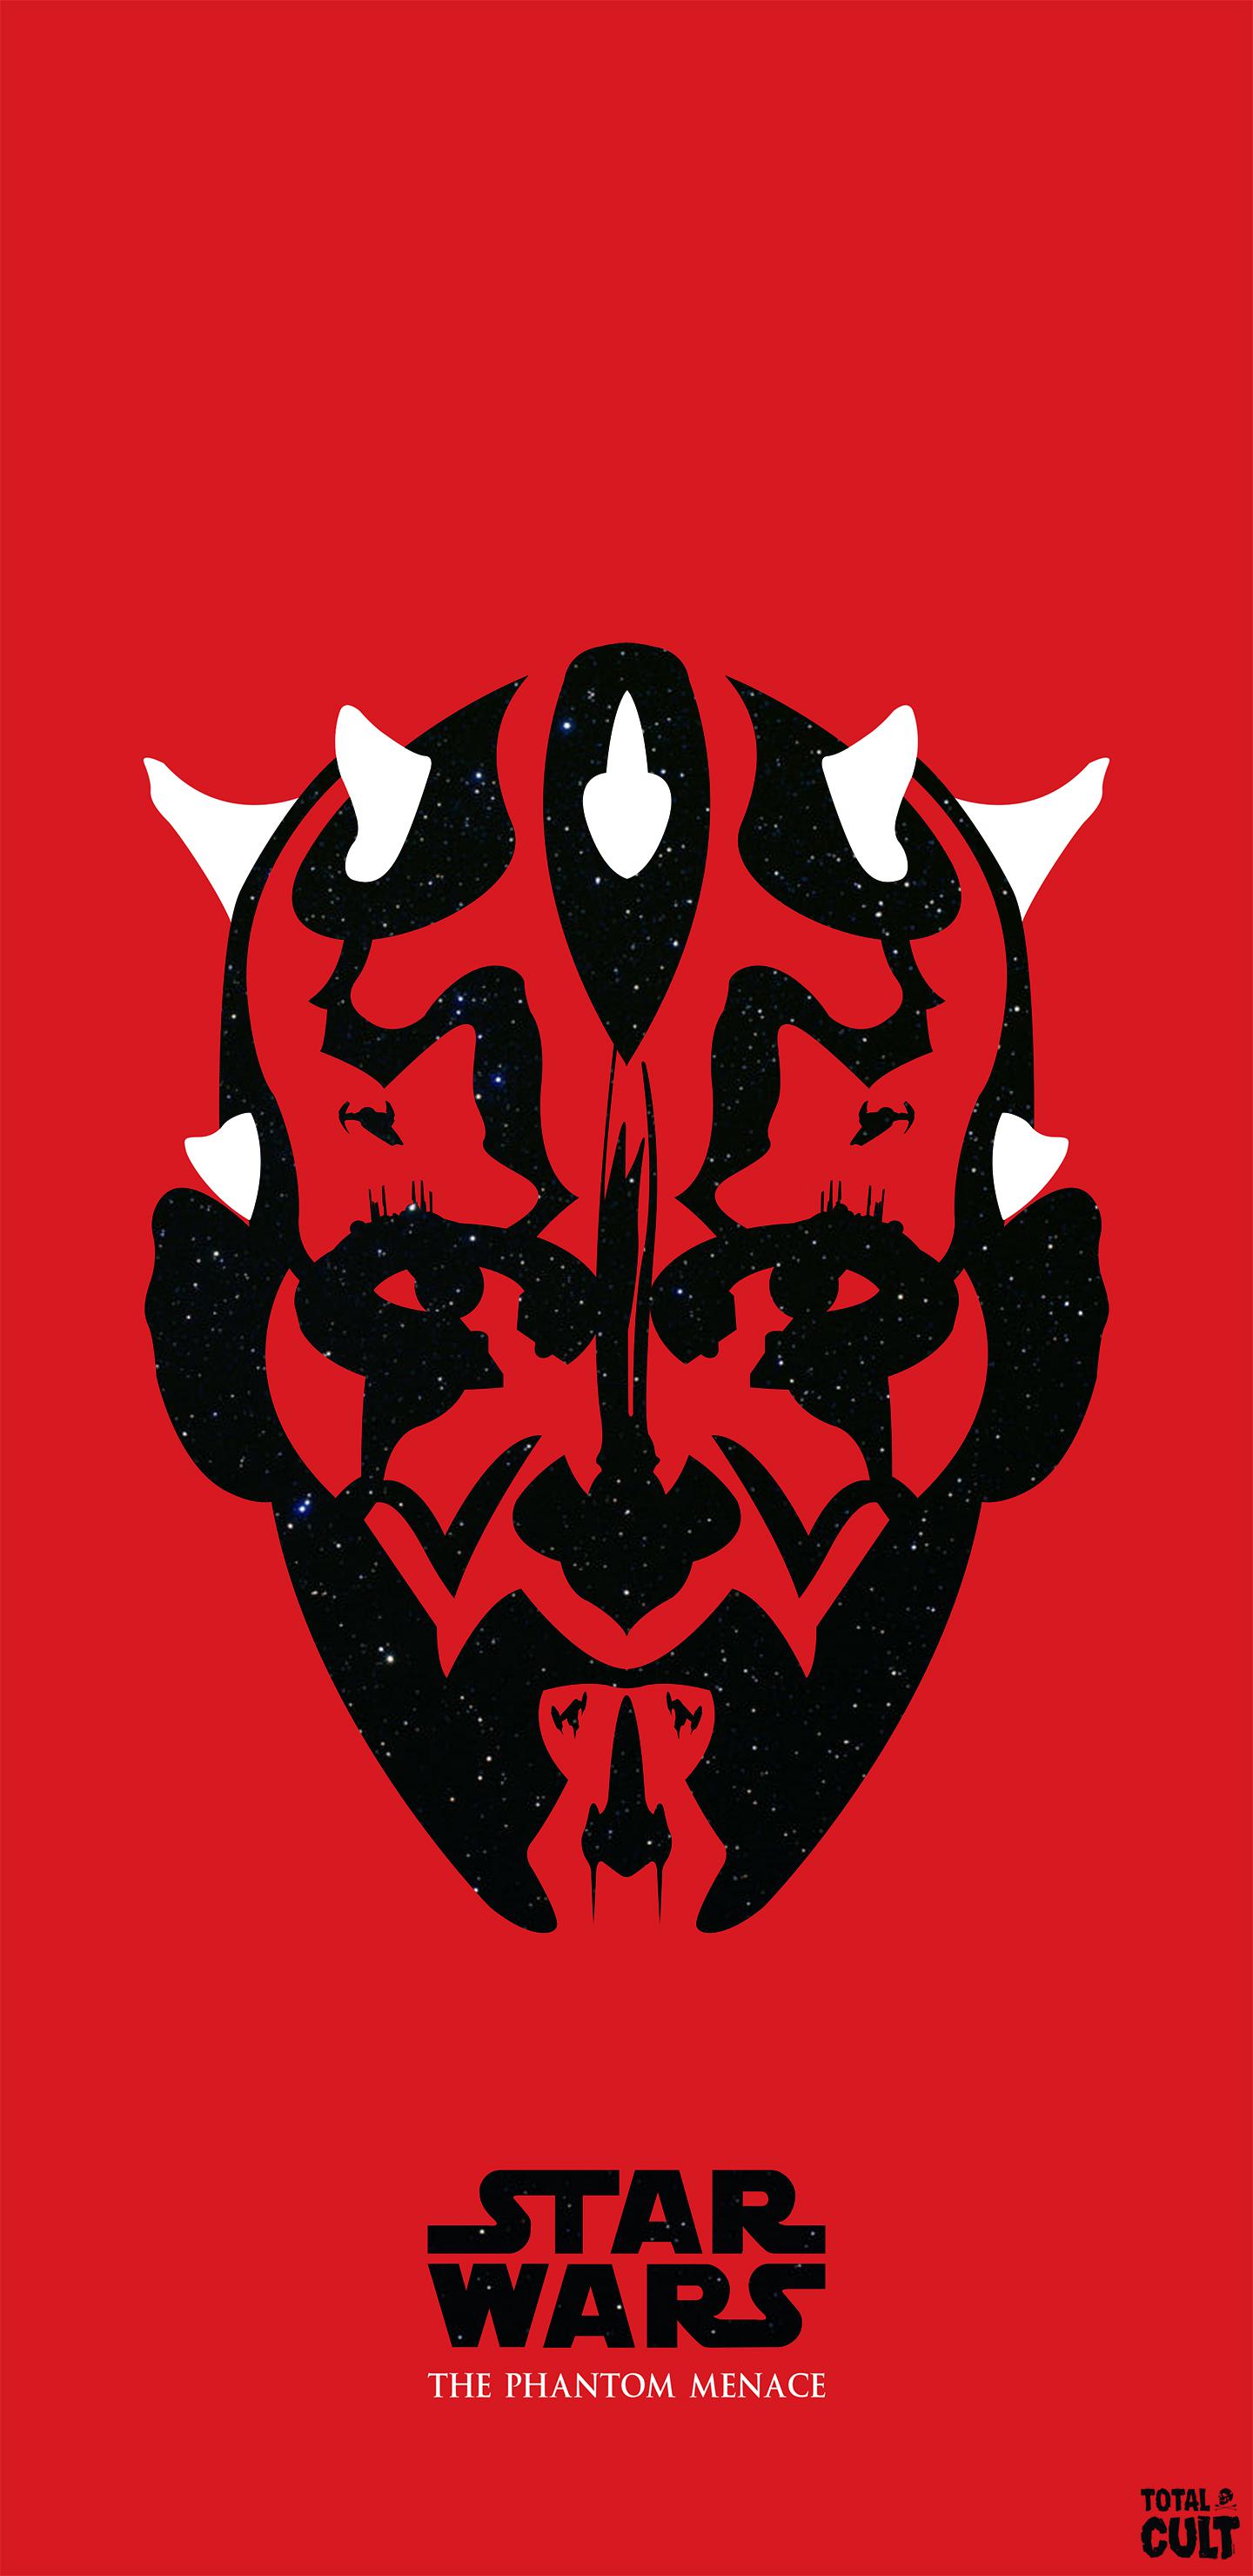 Darth Maul Phone Wallpaper promised, an updated version of my Darth Maul artwork made of ships from The Phantom Menace film. Enjoy!